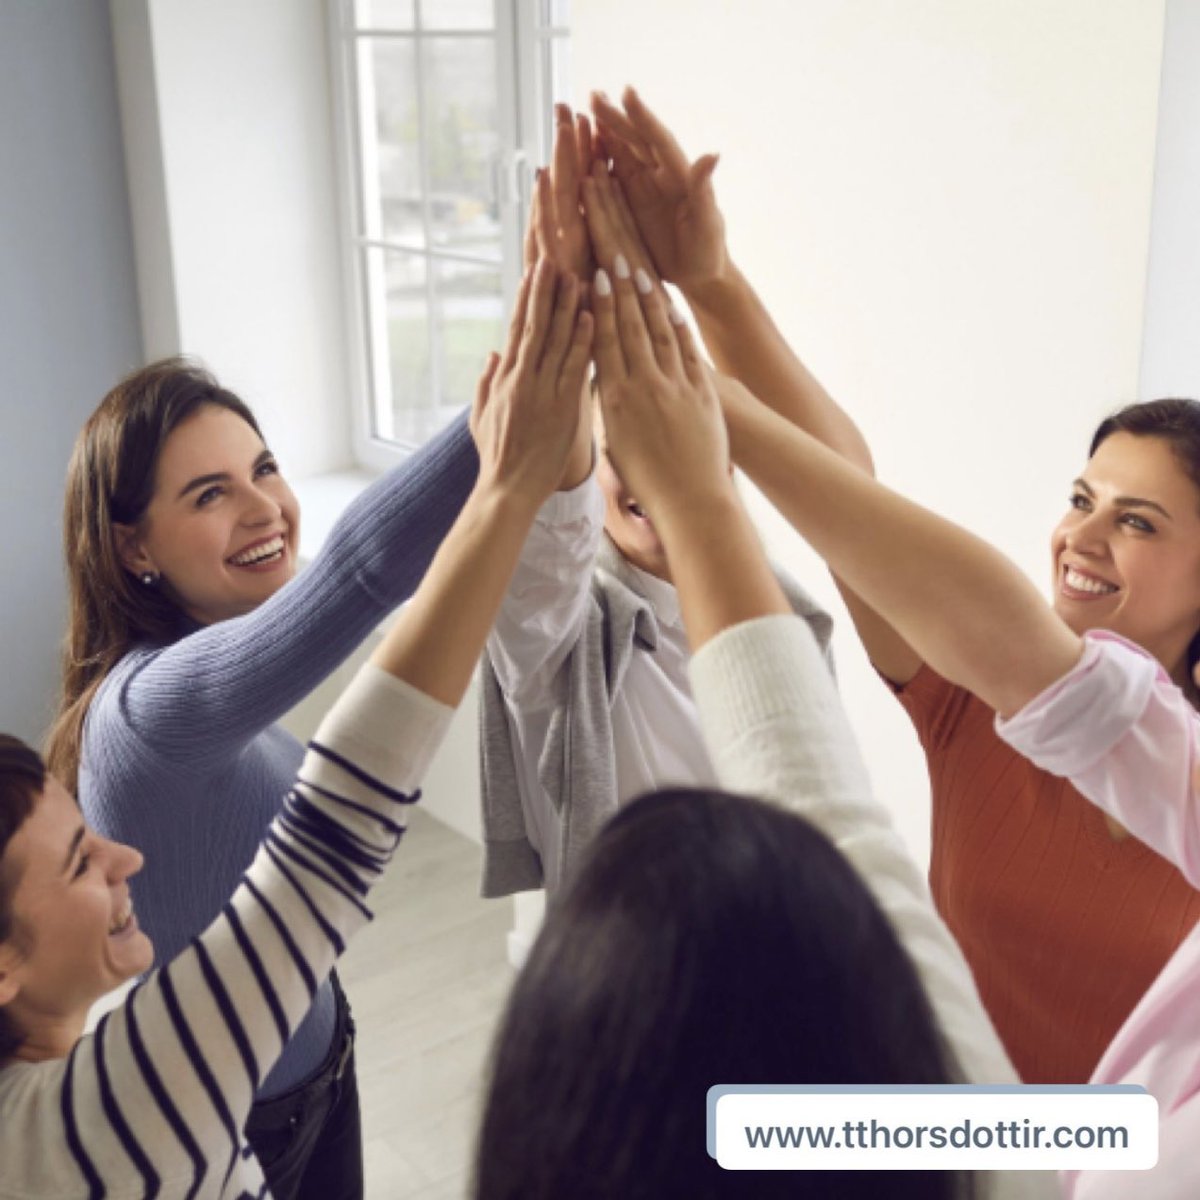 Whether you’re integrating a new manager, or re-organising your internal teams, the people make all the difference. Explore how our Team Optimisation services empower your executives and teams for success.

#teamdevelopment #teameffectiveness #mergers #acquisitions